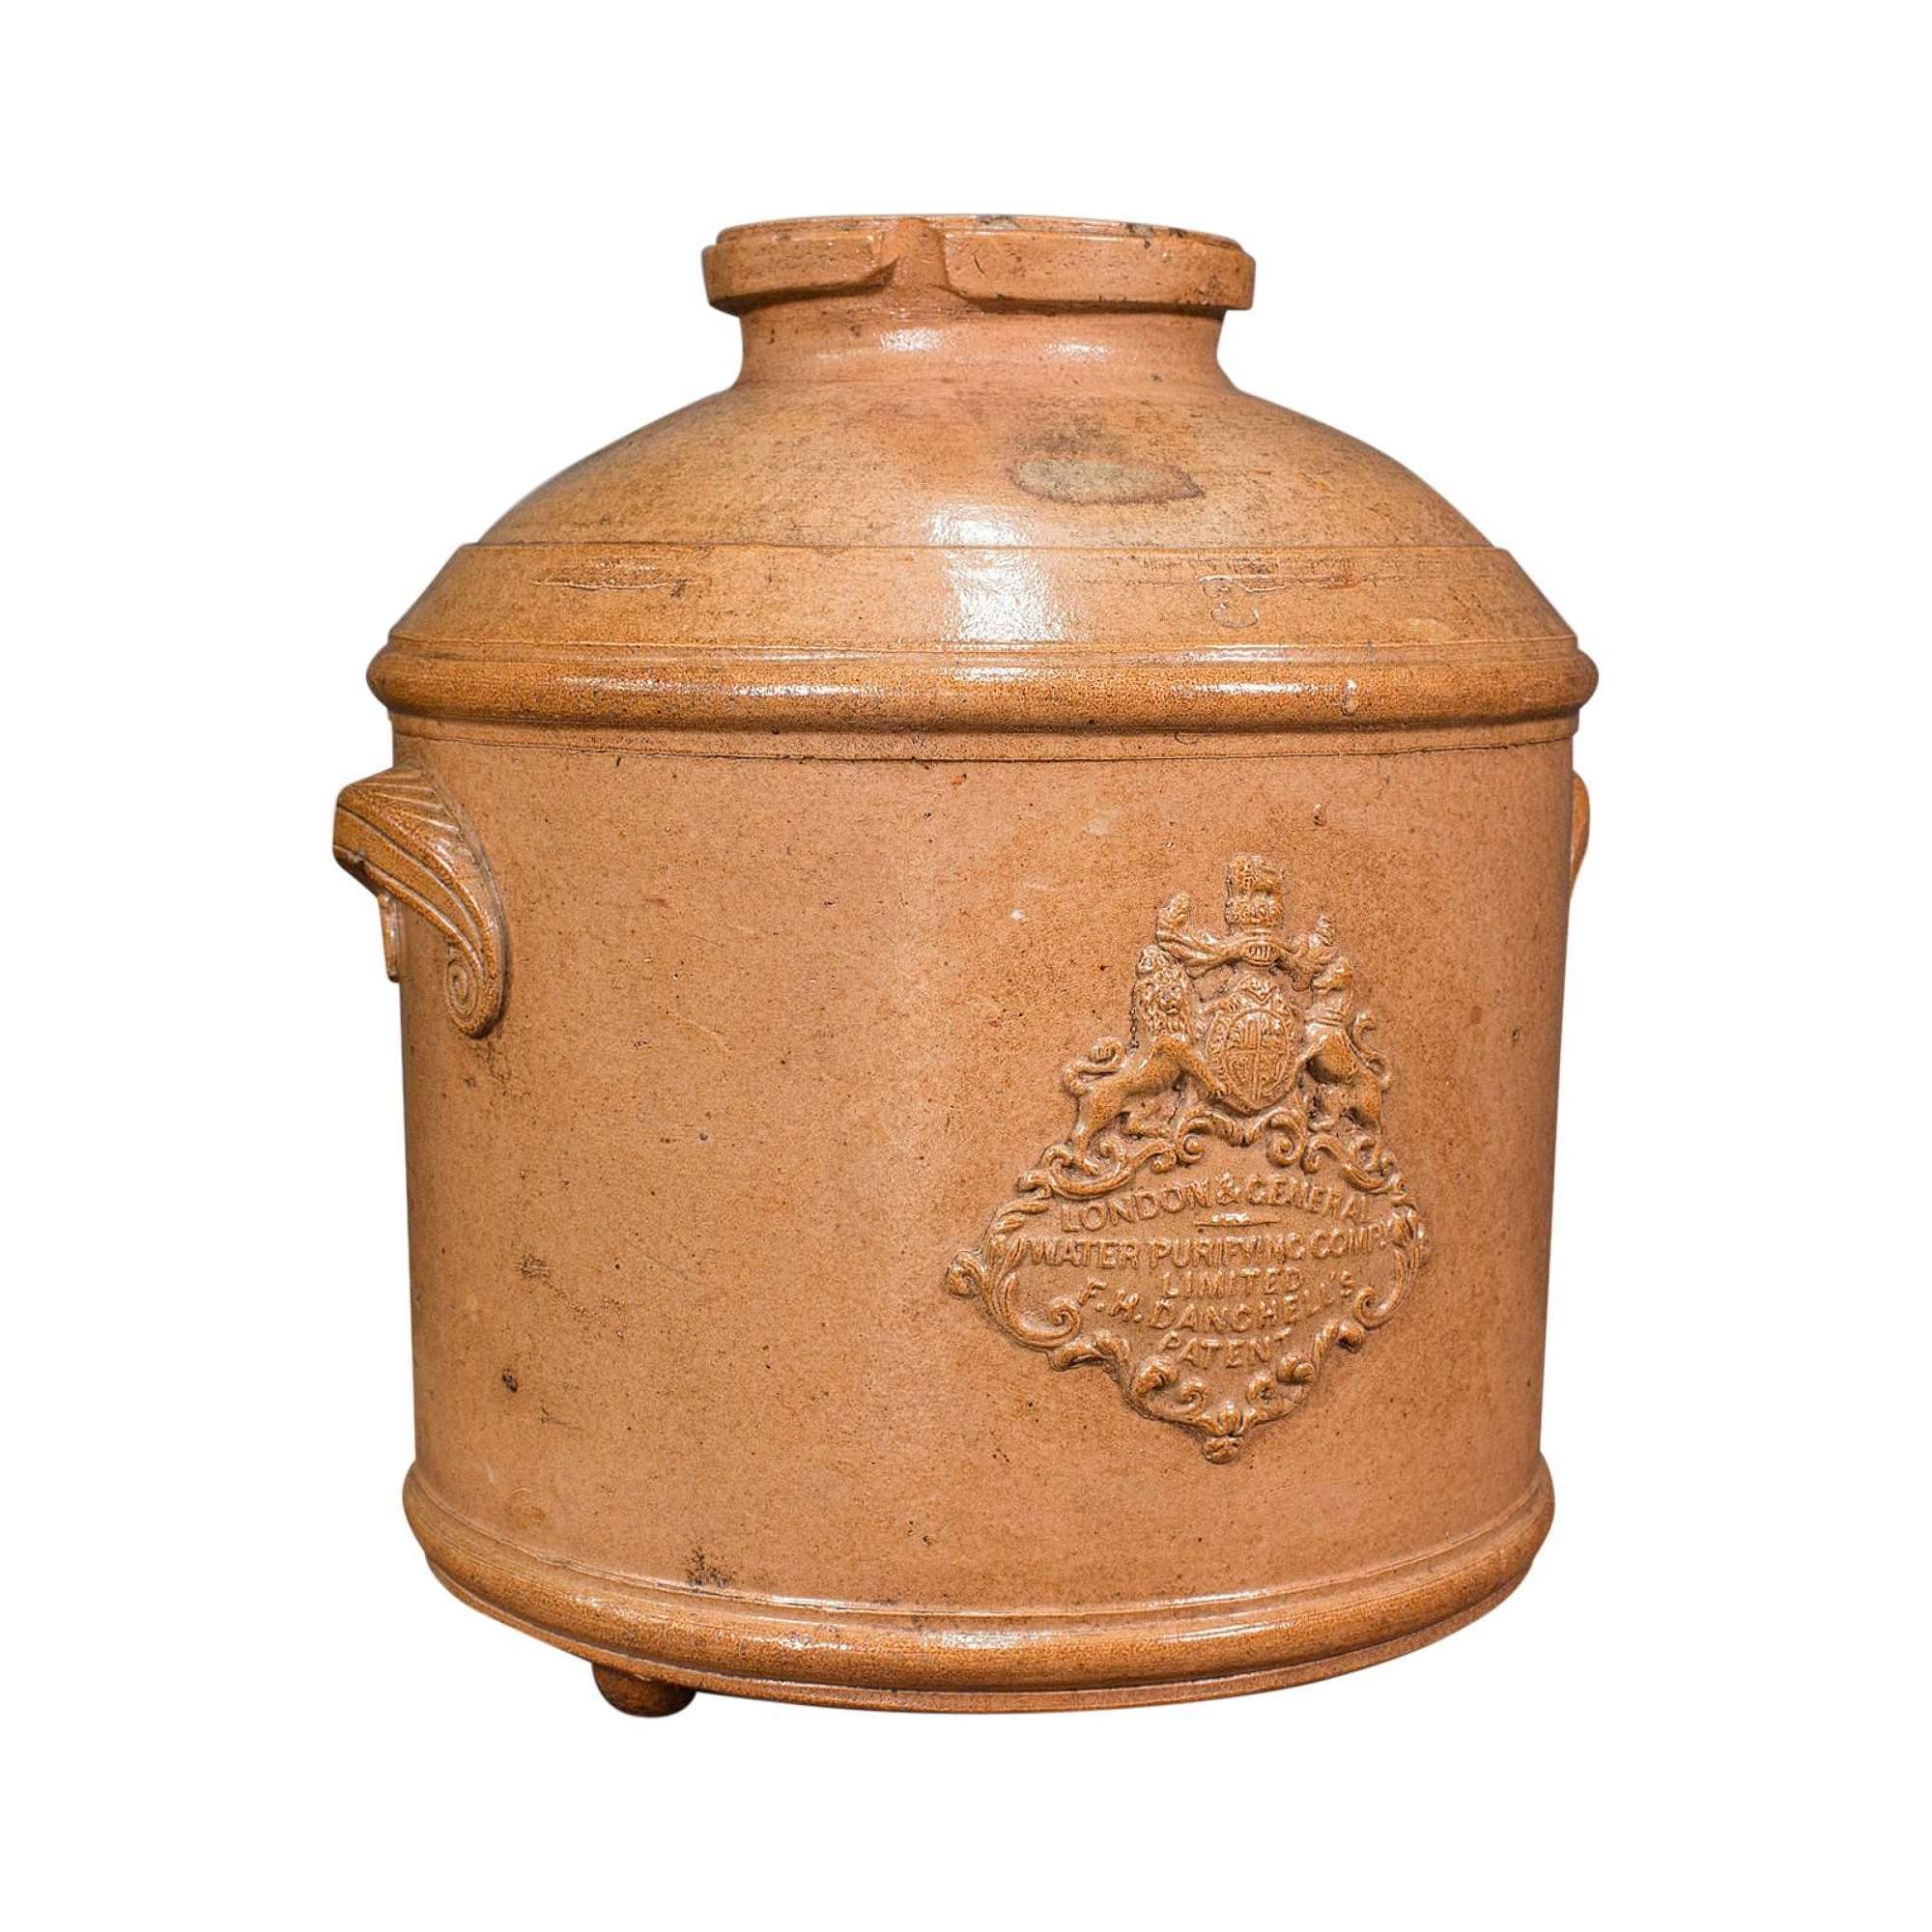 Antique Water Purifying Filter, English, Ceramic, Decorative, Victorian, C.1870